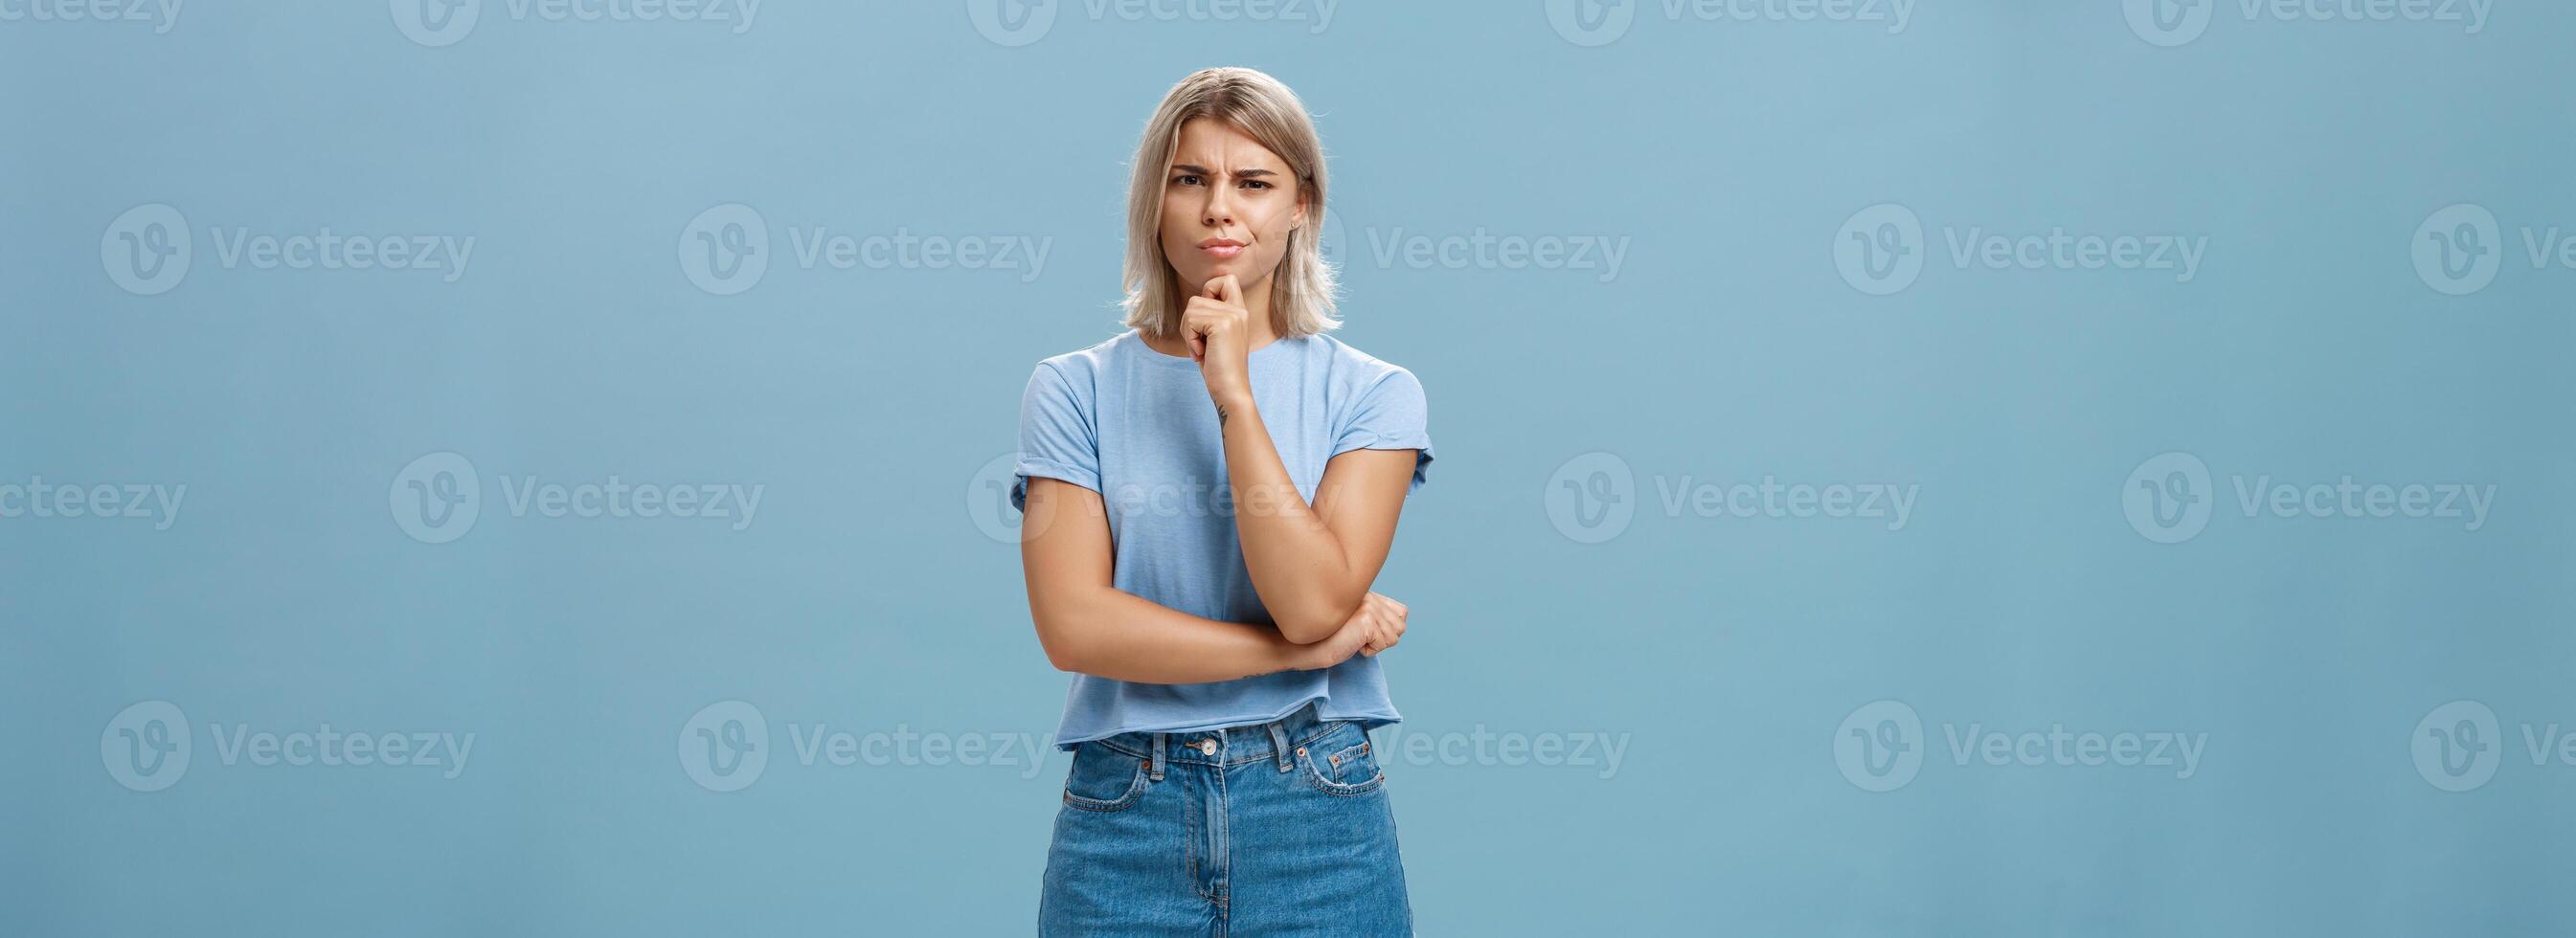 I doubt it good idea. Suspicious intense creative young female coworker in outdoor outfit frowning from doubtful thoughts holding hand on chin while thinking expressing disbelief over blue wall photo